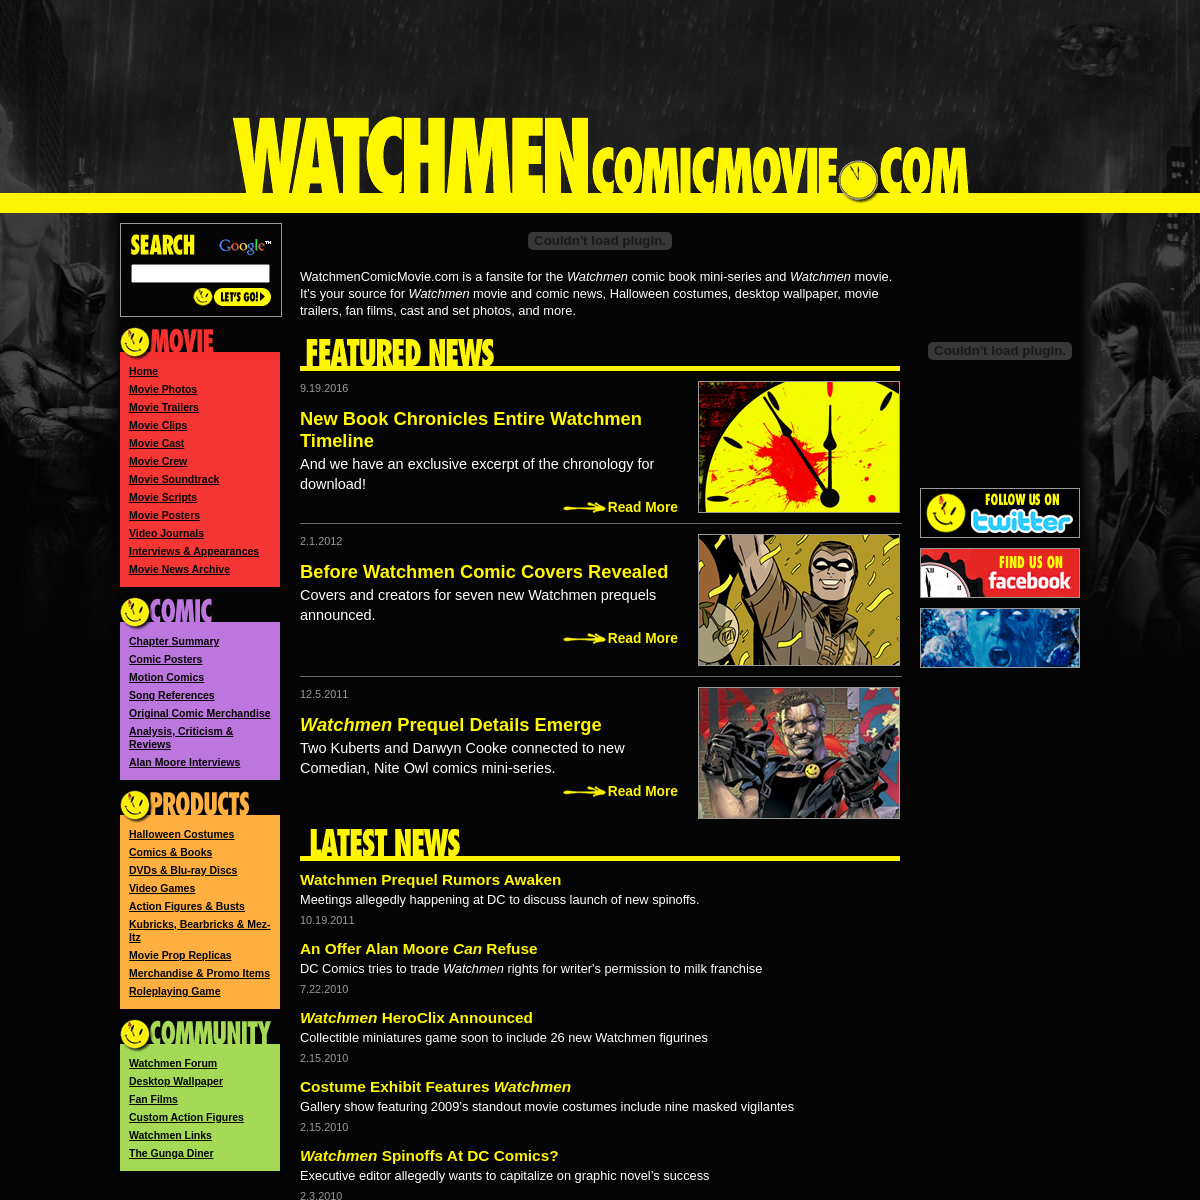 A complete backup of watchmencomicmovie.com